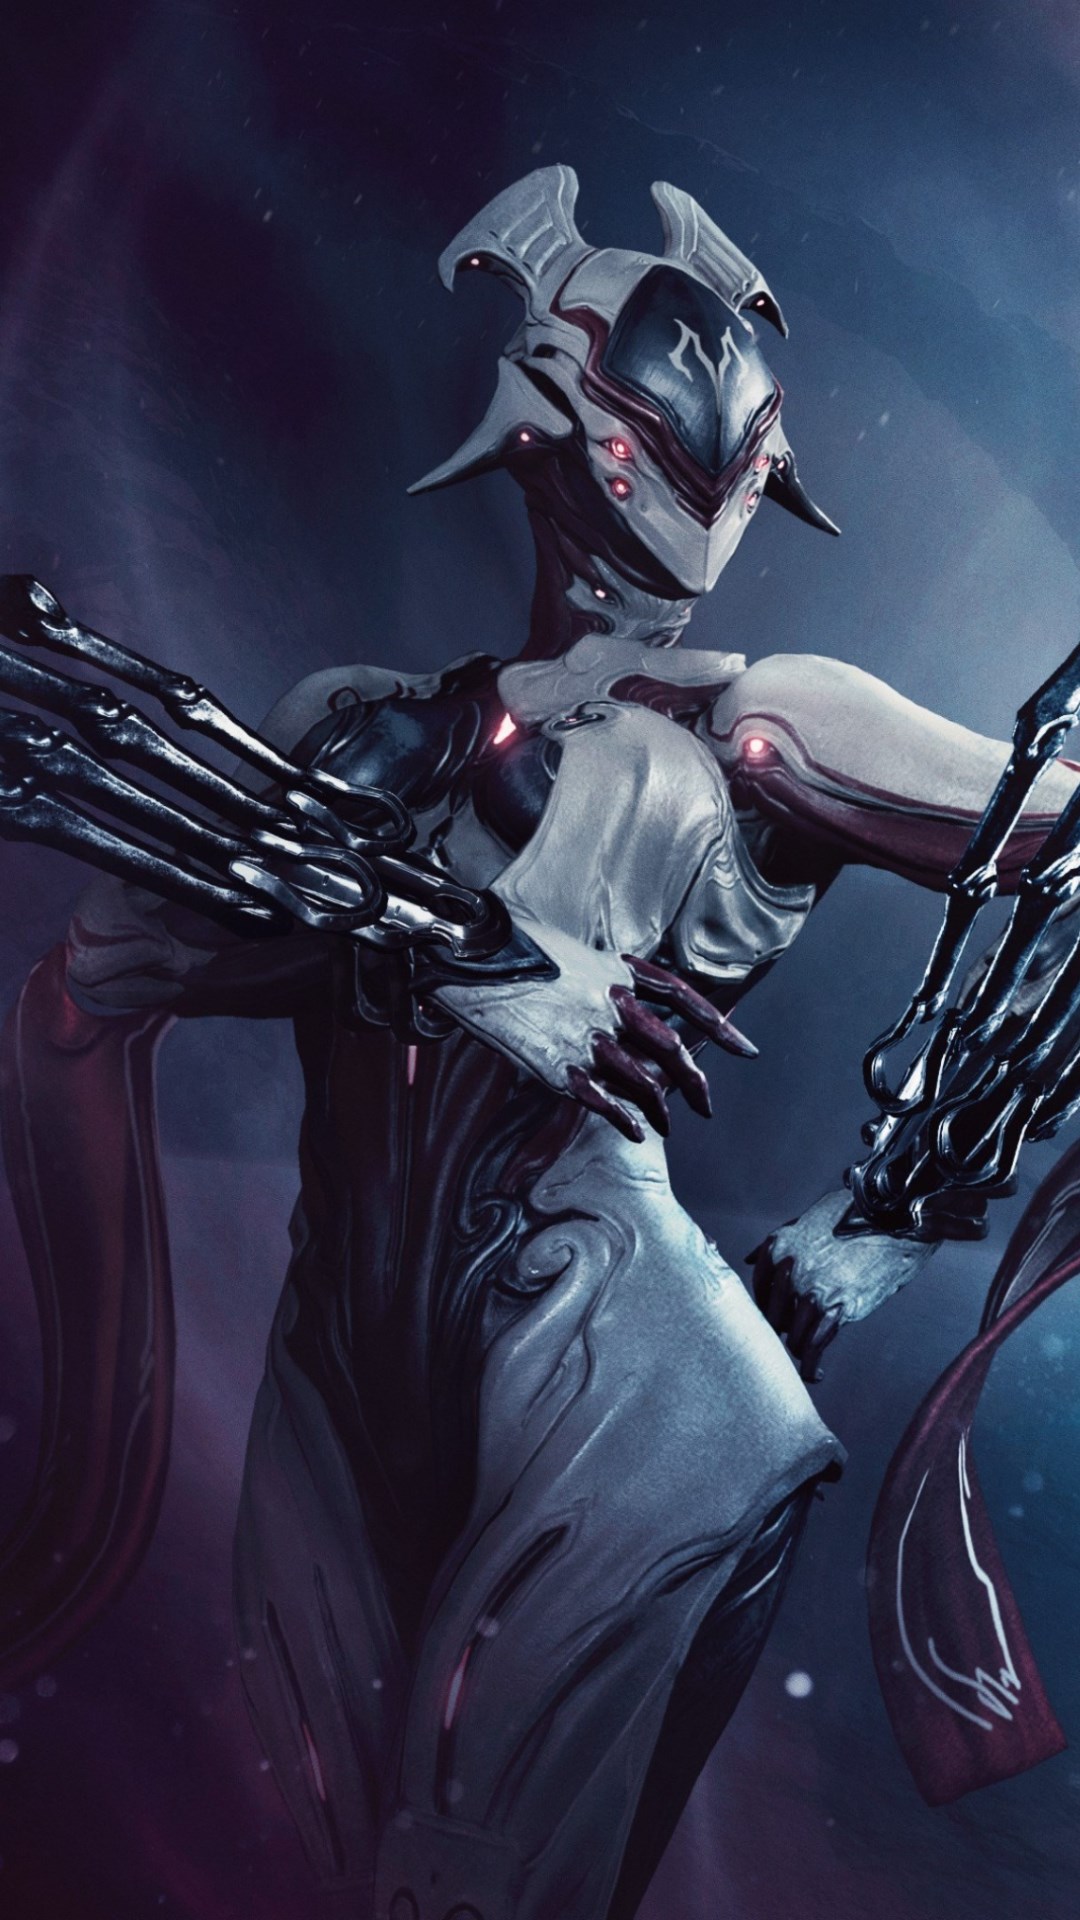 Fortuna expensasion for Warframe game wallpaper 1080x1920